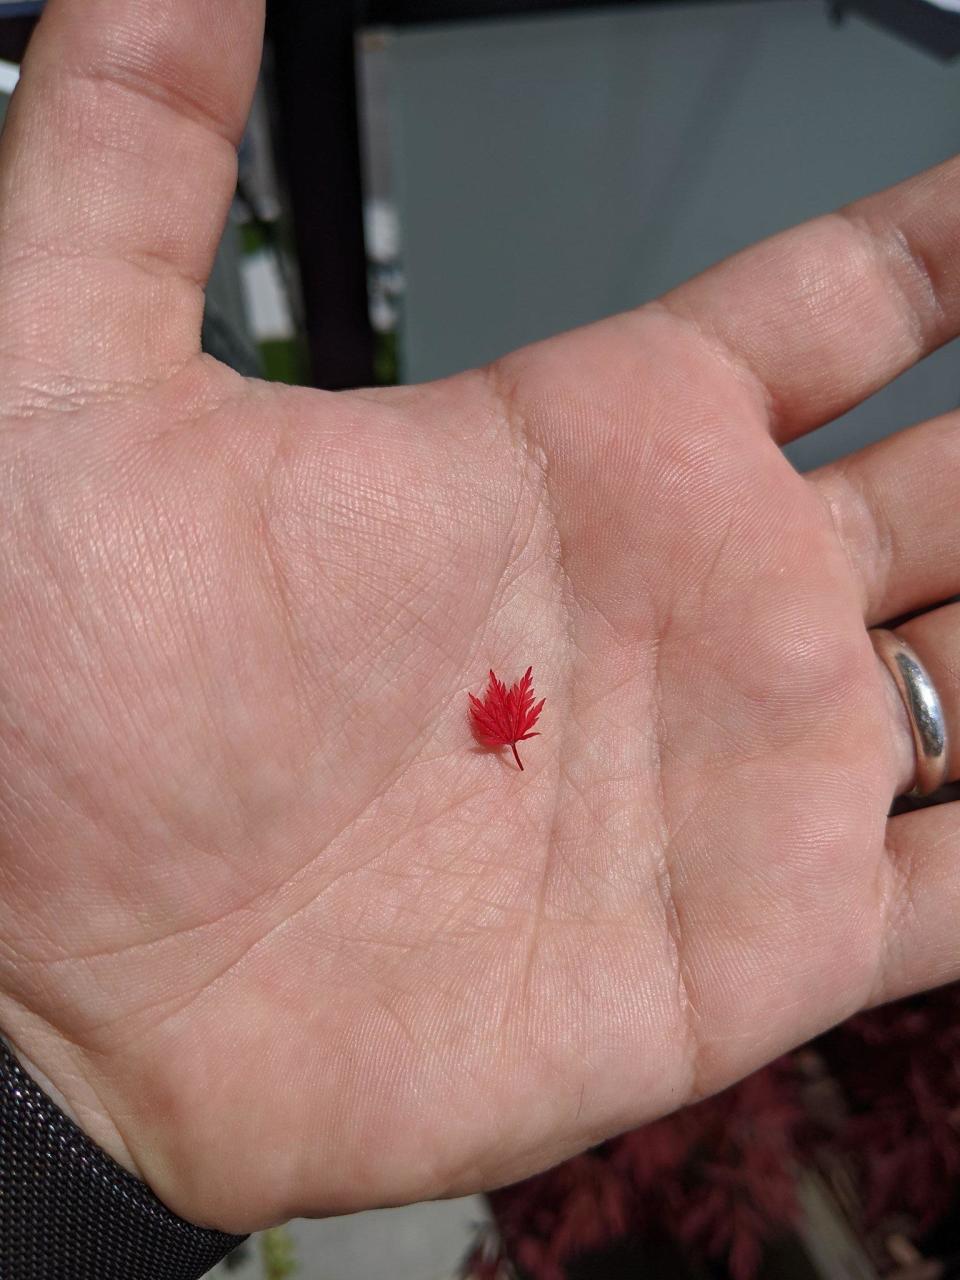 A tiny red leaf rests in the center of a person's open palm